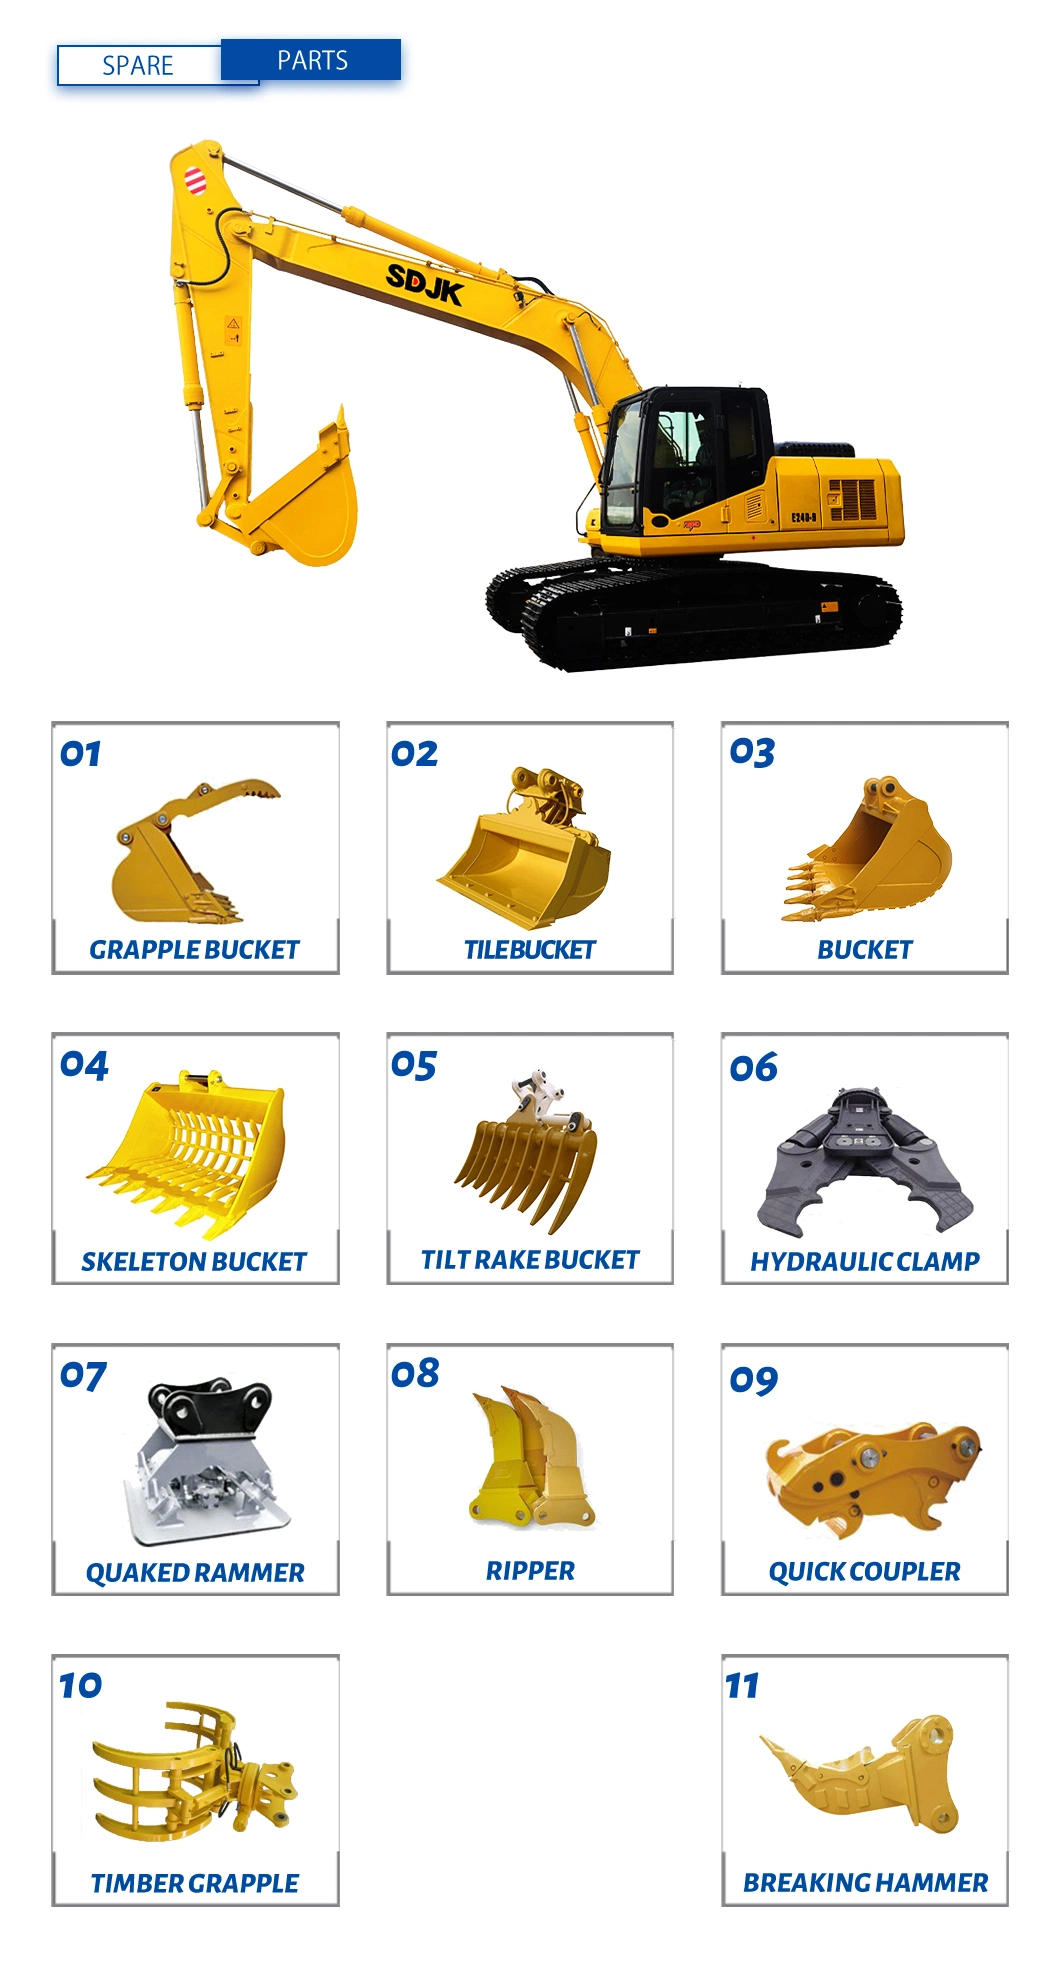 New Medium Excavator Machines with Cheap Prices for Sale 24 Ton